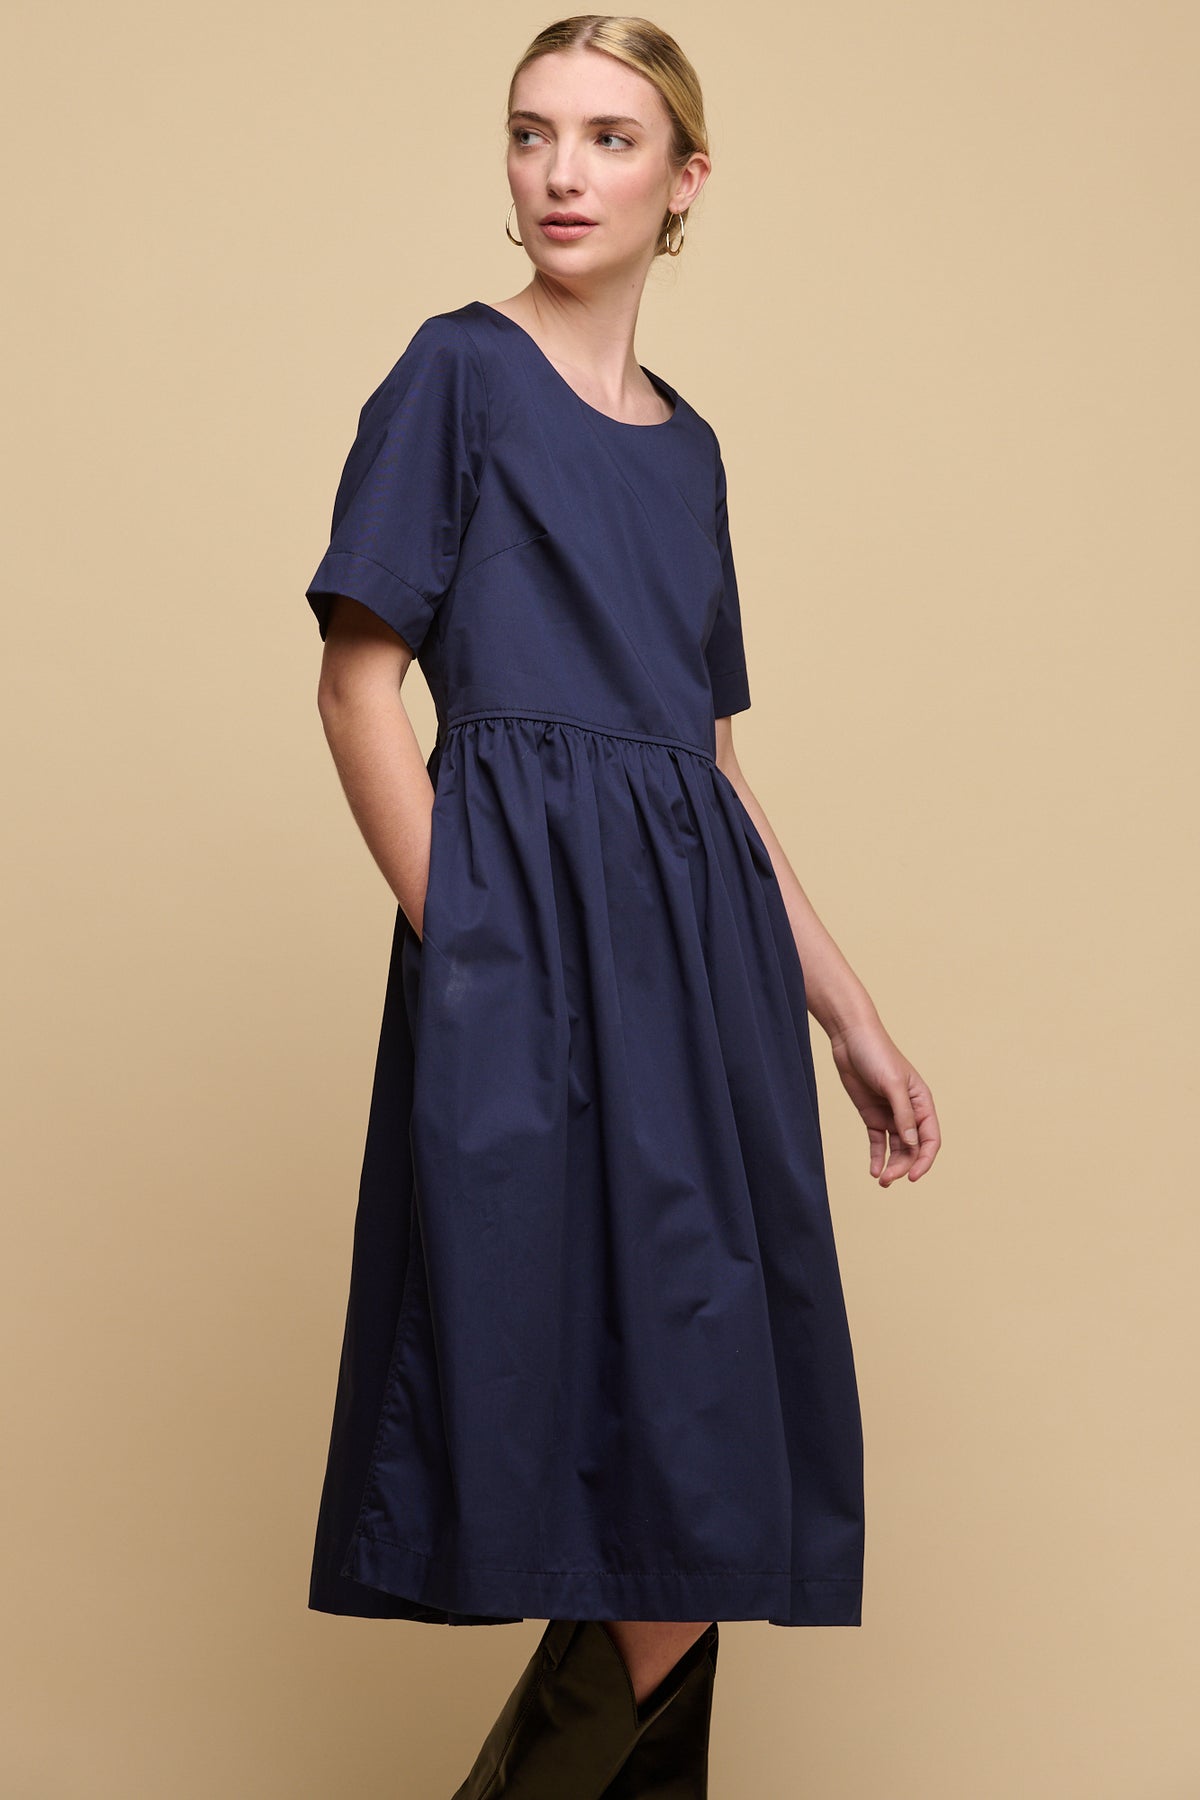 
            Blonde female with fair skin wearing crew neck gathered dress in navy, with a hand in one of the front pockets